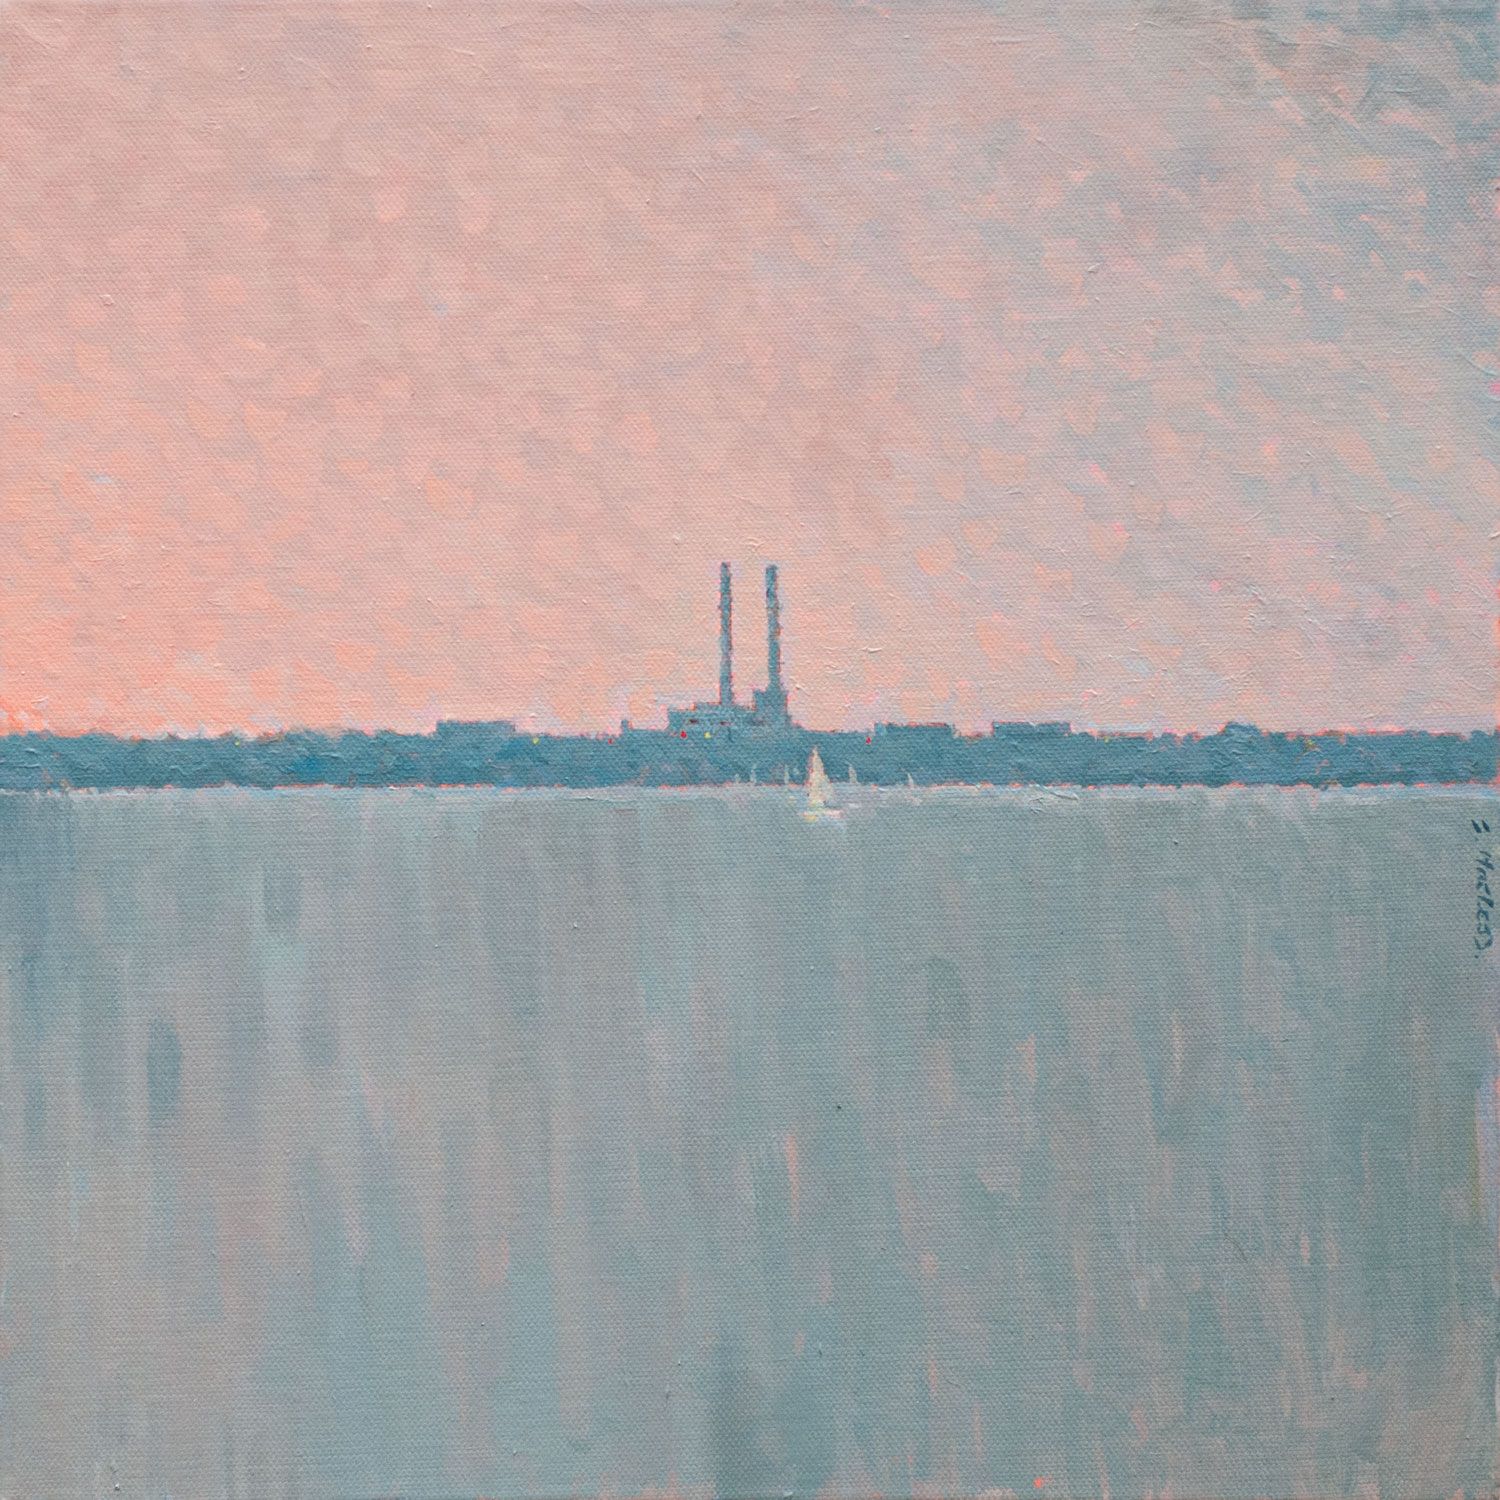 Passing Distant Sails, Sandymount by Simon Macleod